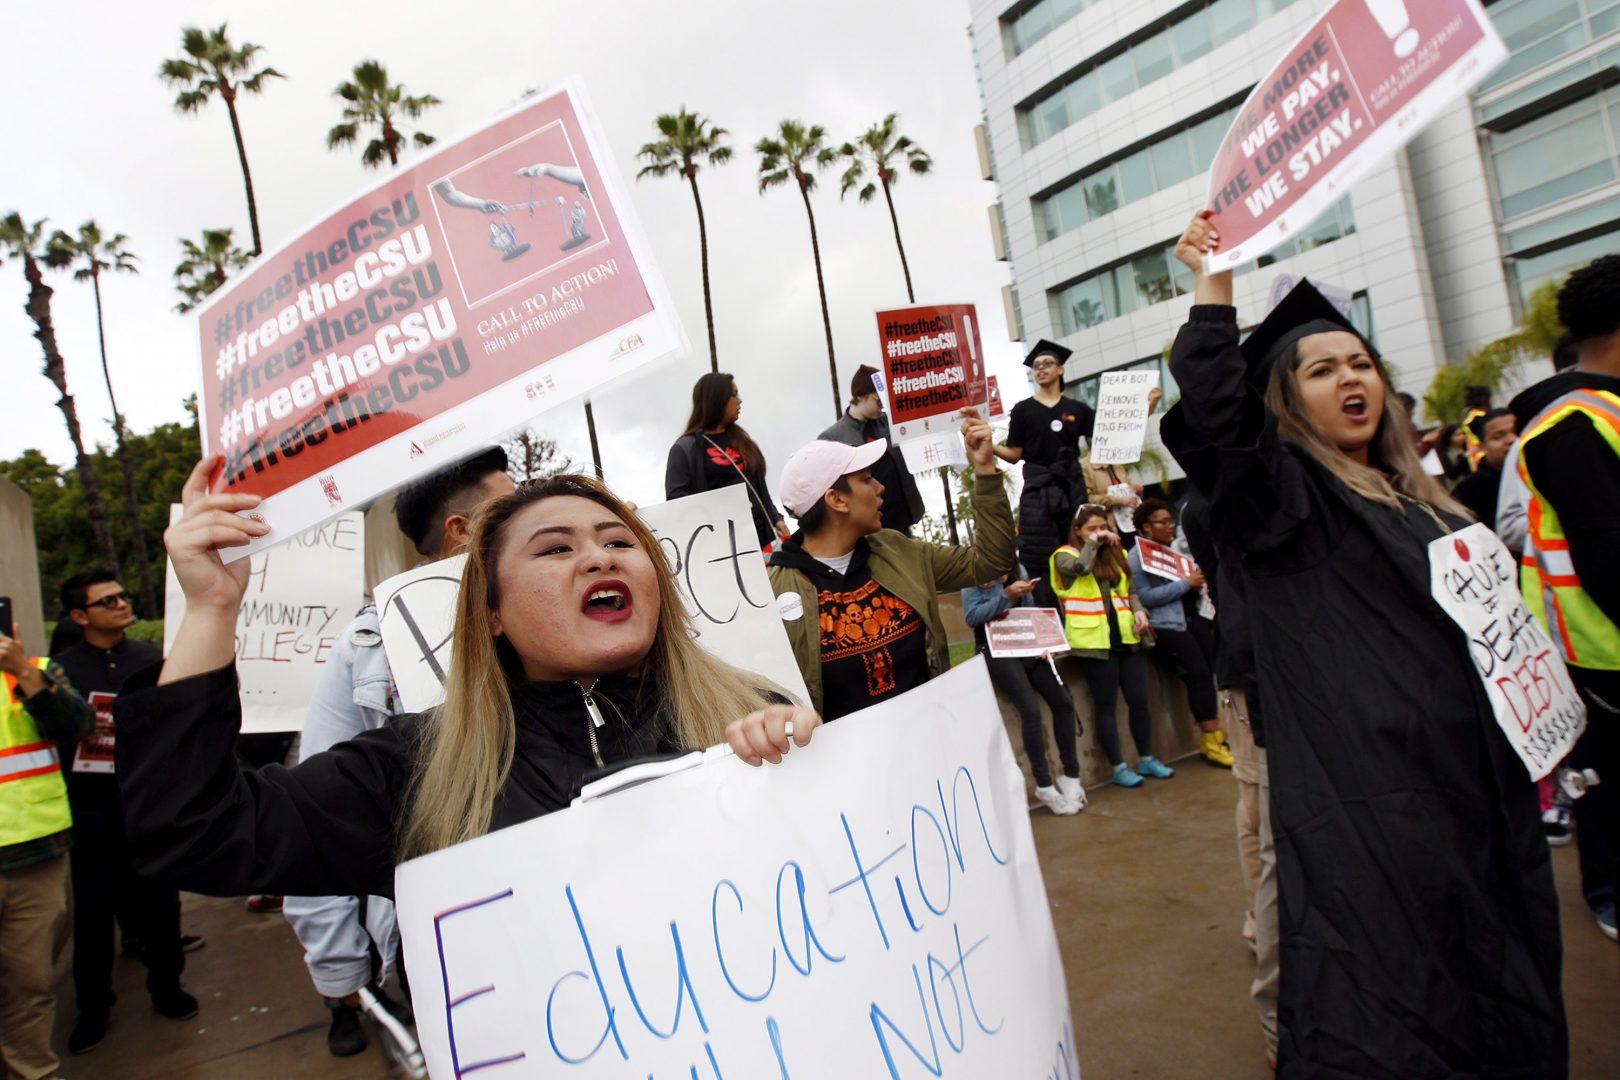 Students from across the systems 23 campuses protest outside the Cal State trustees board meeeting Wednesday, March 22, 2017 in Long Beach, Calif. (Iran Khan/Los Angeles Times/TNS)